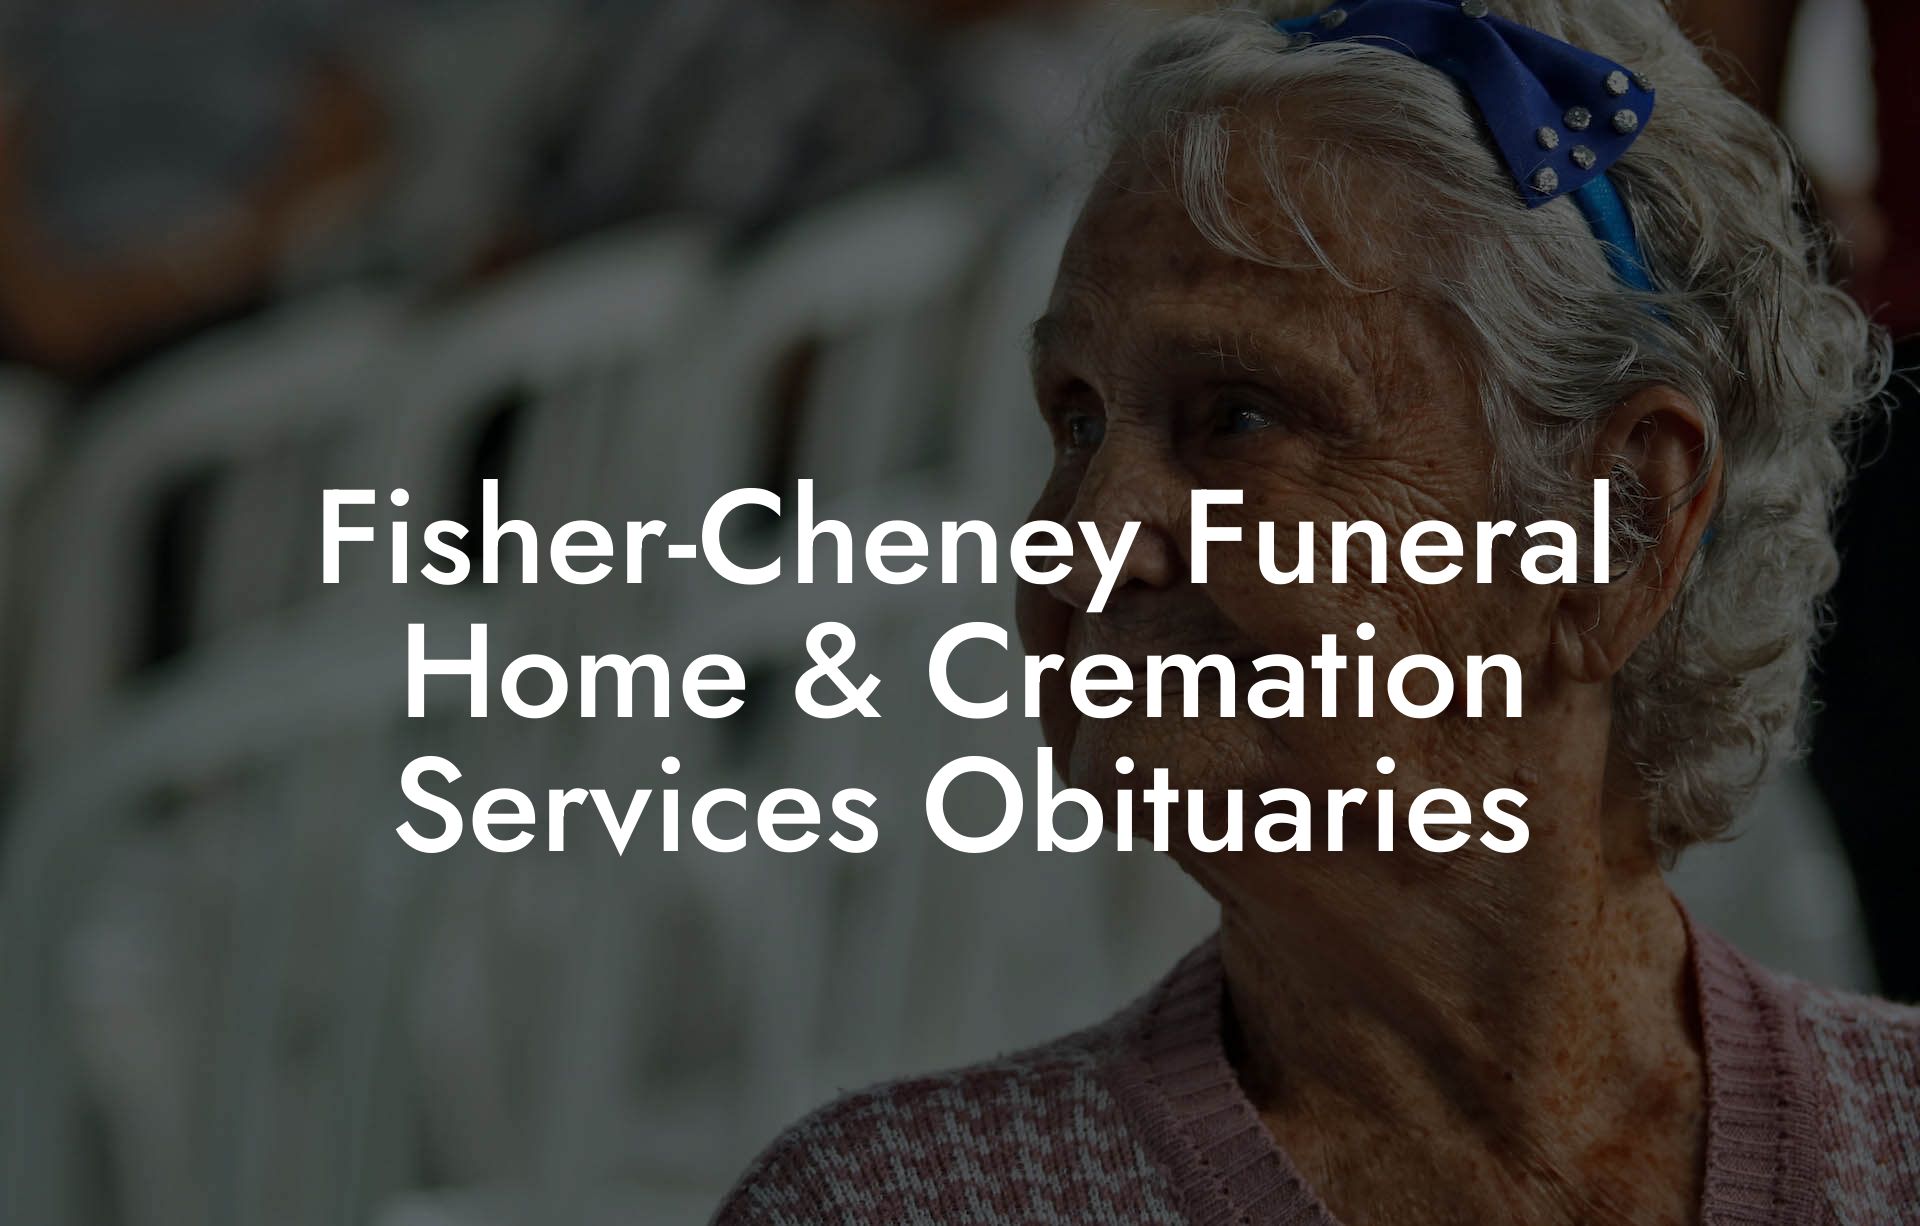 Fisher-Cheney Funeral Home & Cremation Services Obituaries